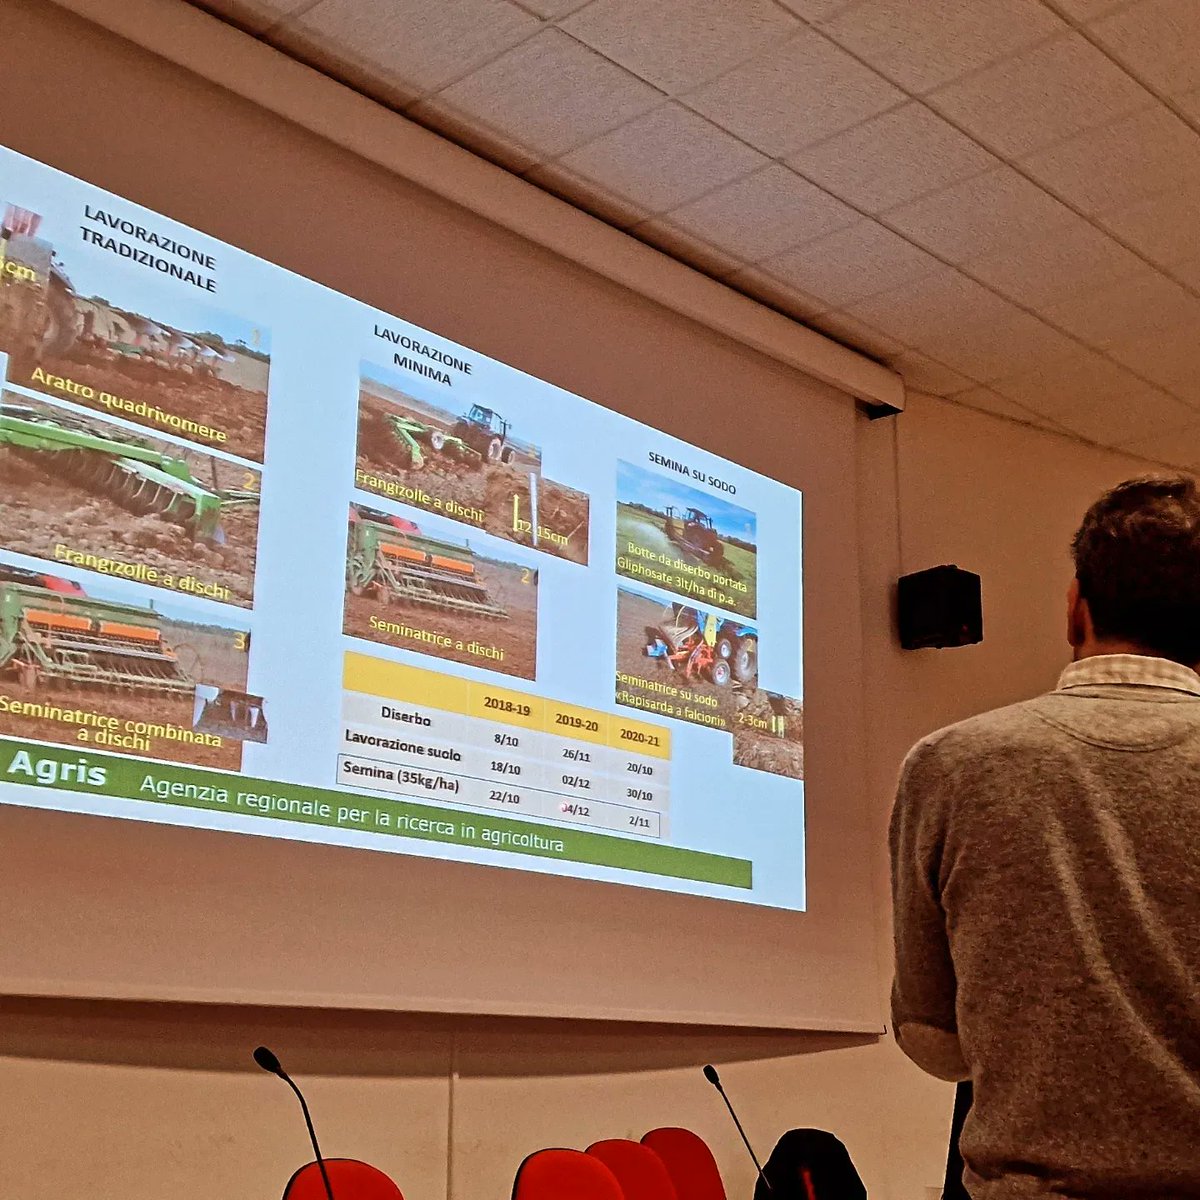 Yesterday, #AgrisSardegna @uniss and @cmccclimate presented the final results of #TERRAS project on #soilconservationtillage in #tree and #herbaceous crops. We will further explore this topic in the european projects @inbestsoil, @arsinoe and @EJPSOIL_Artemis
Stay tuned!